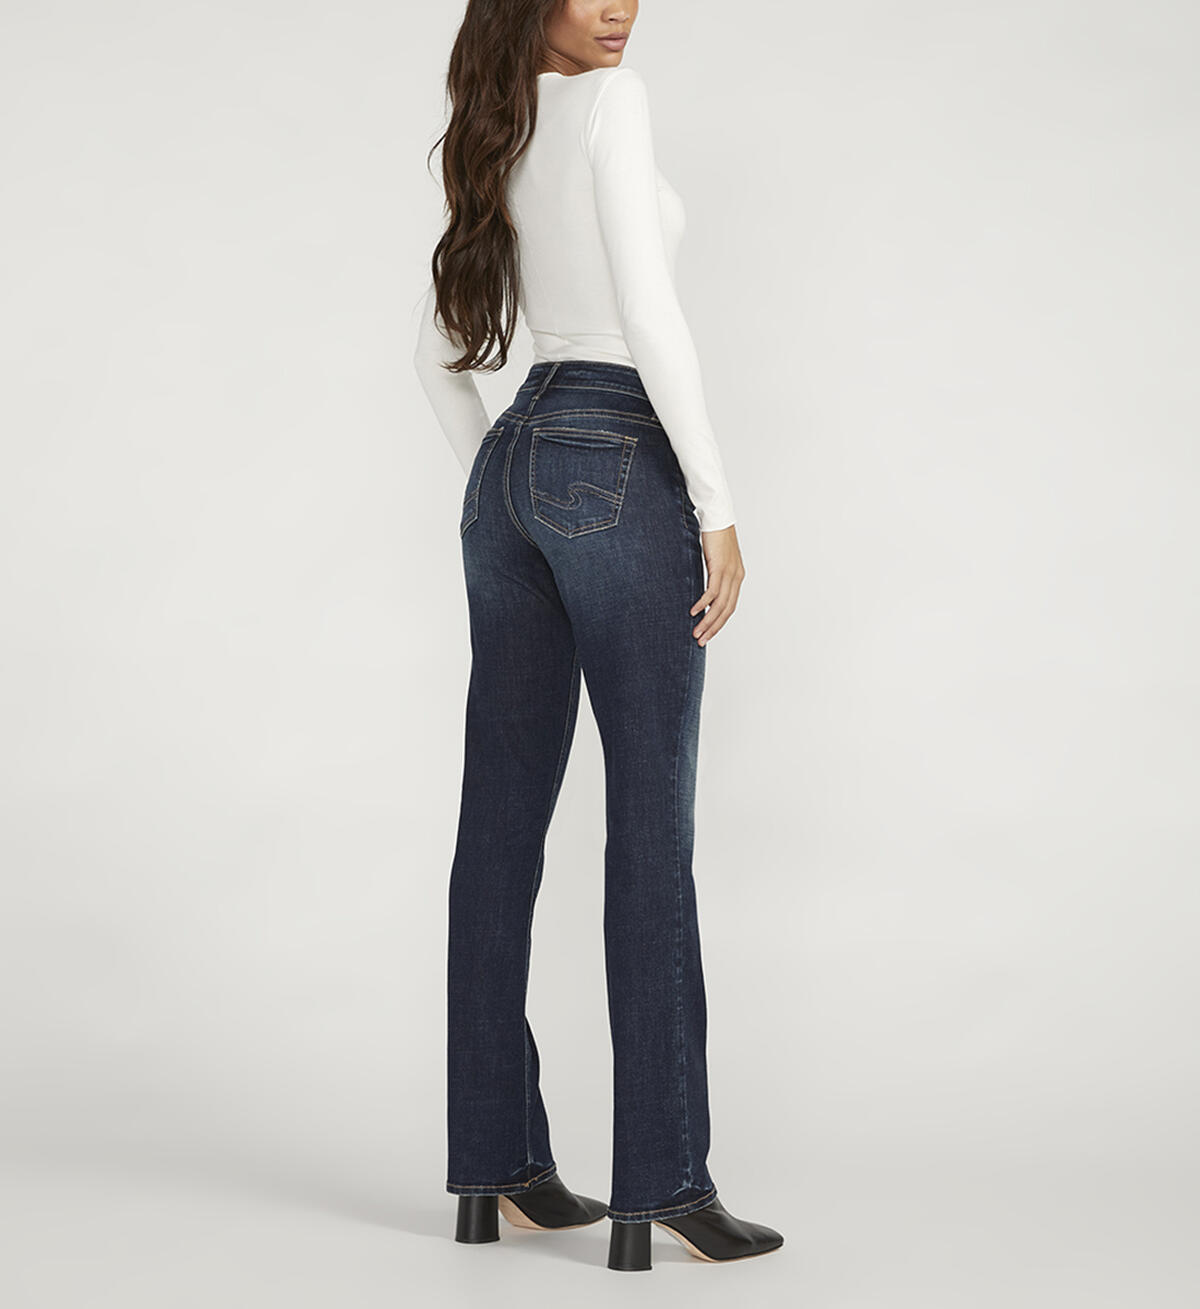 Buy Eloise Mid Rise Bootcut Jeans for USD 79.00